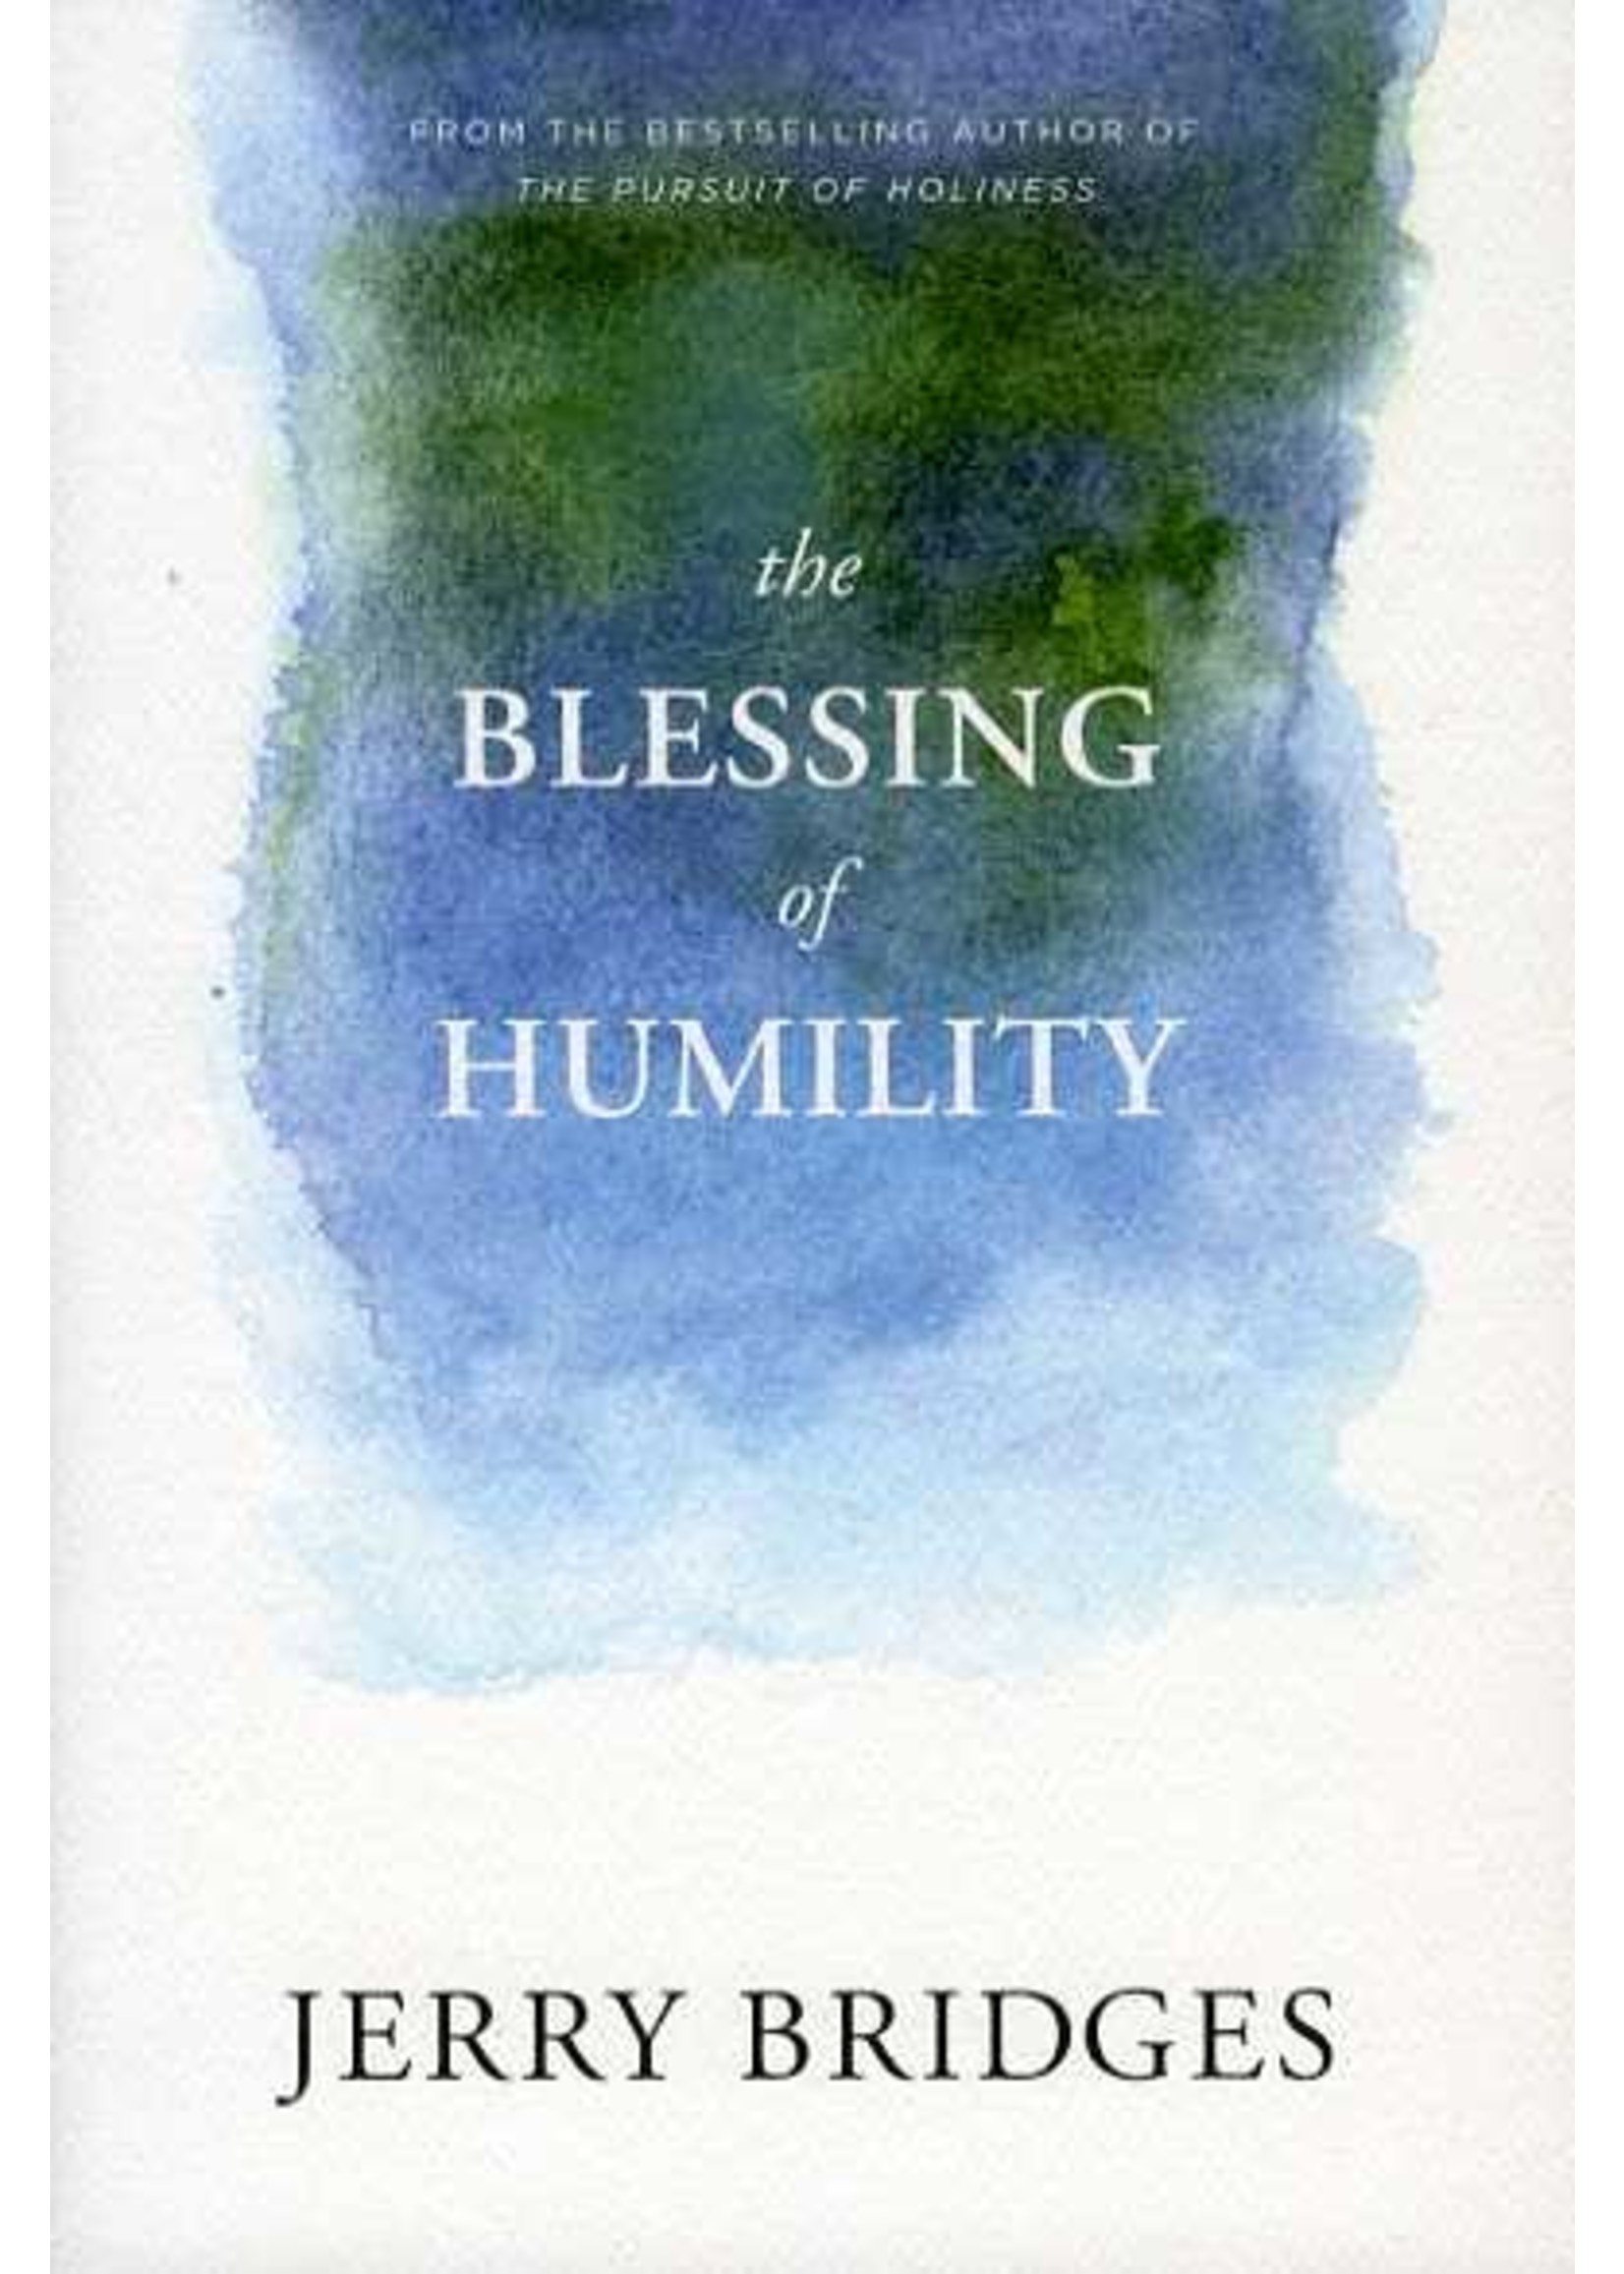 Tyndale The Blessing of Humility - Jerry Bridges